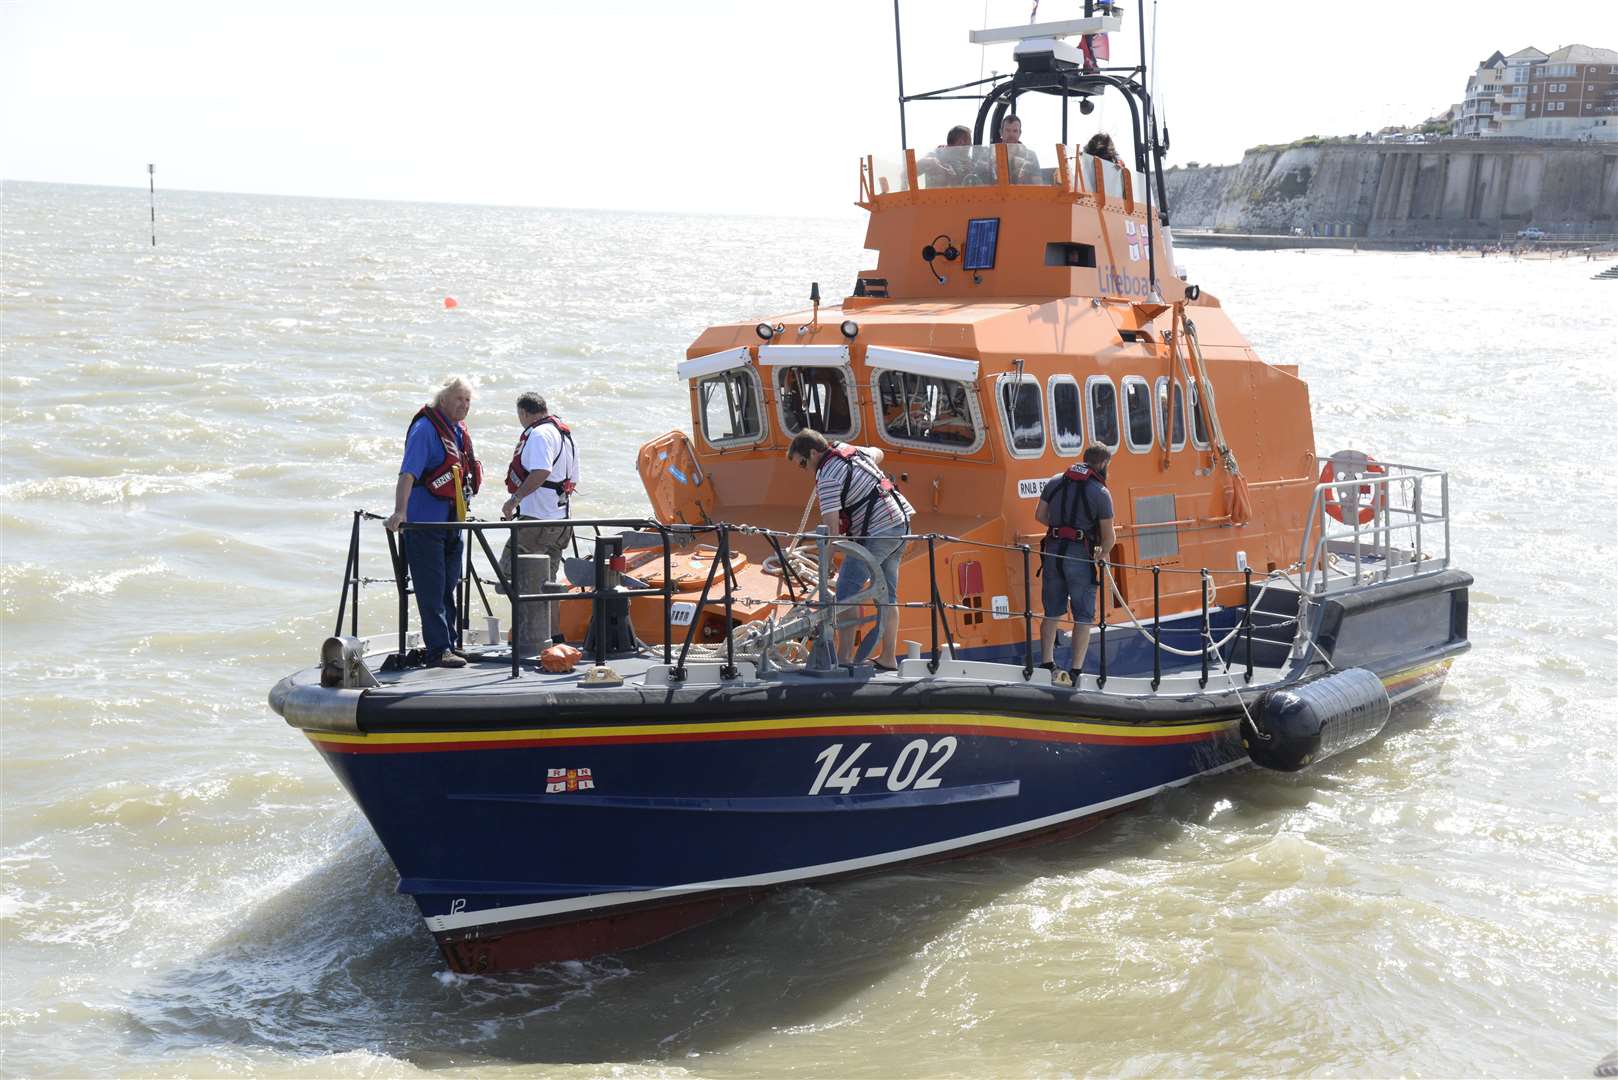 Today's modern lifeboat design originates from Lionel Lukin's patented original